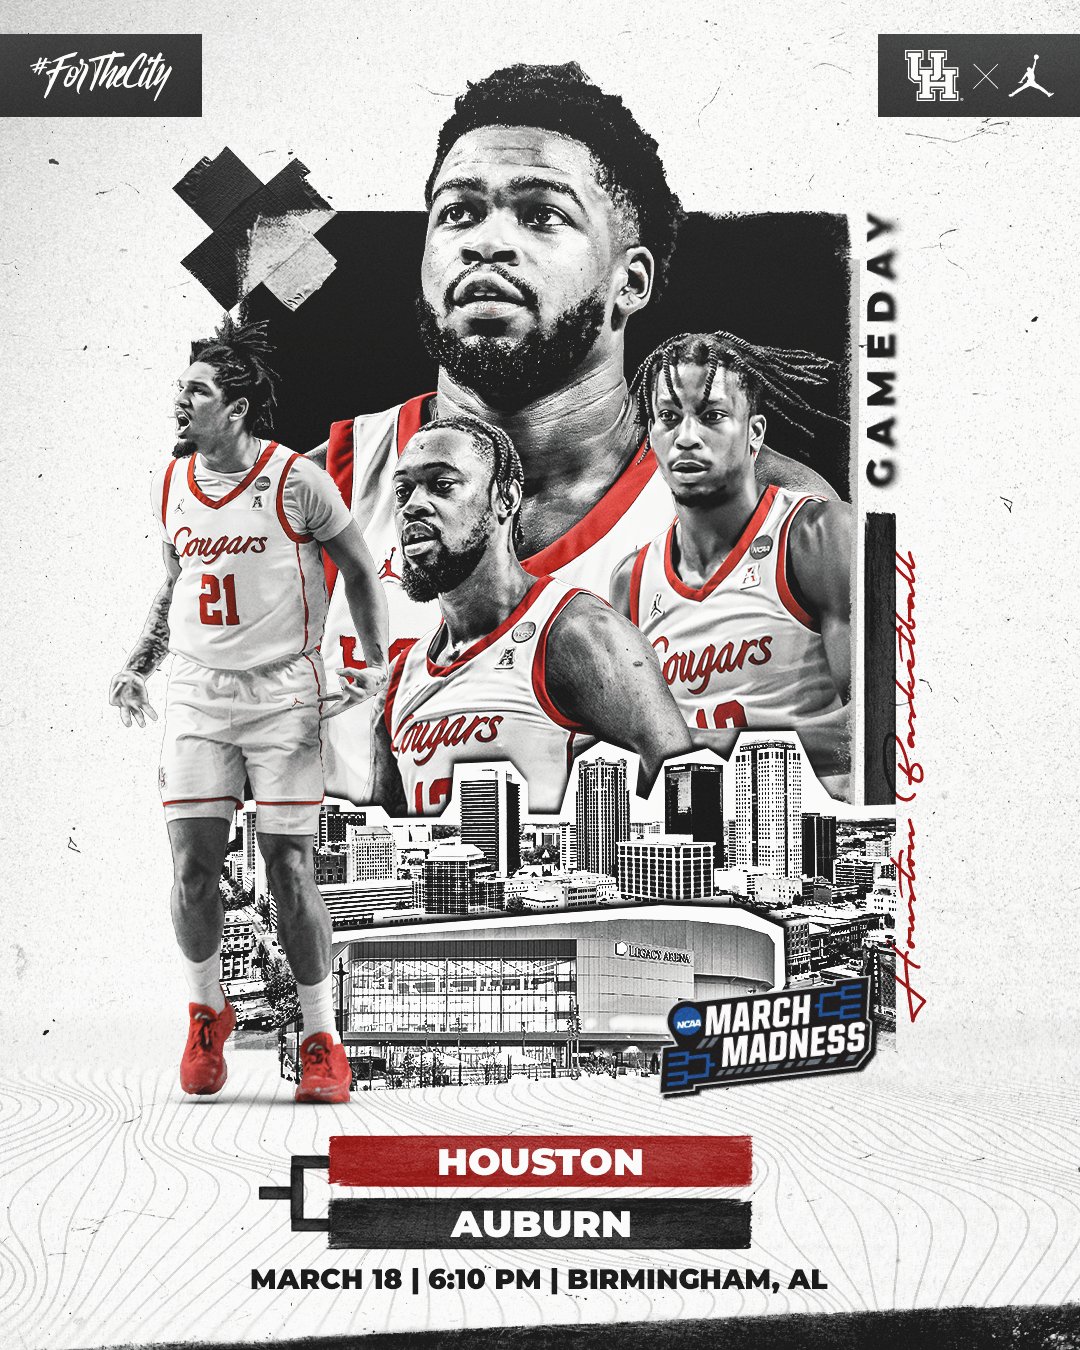 Houston Cougars March Madness jersey